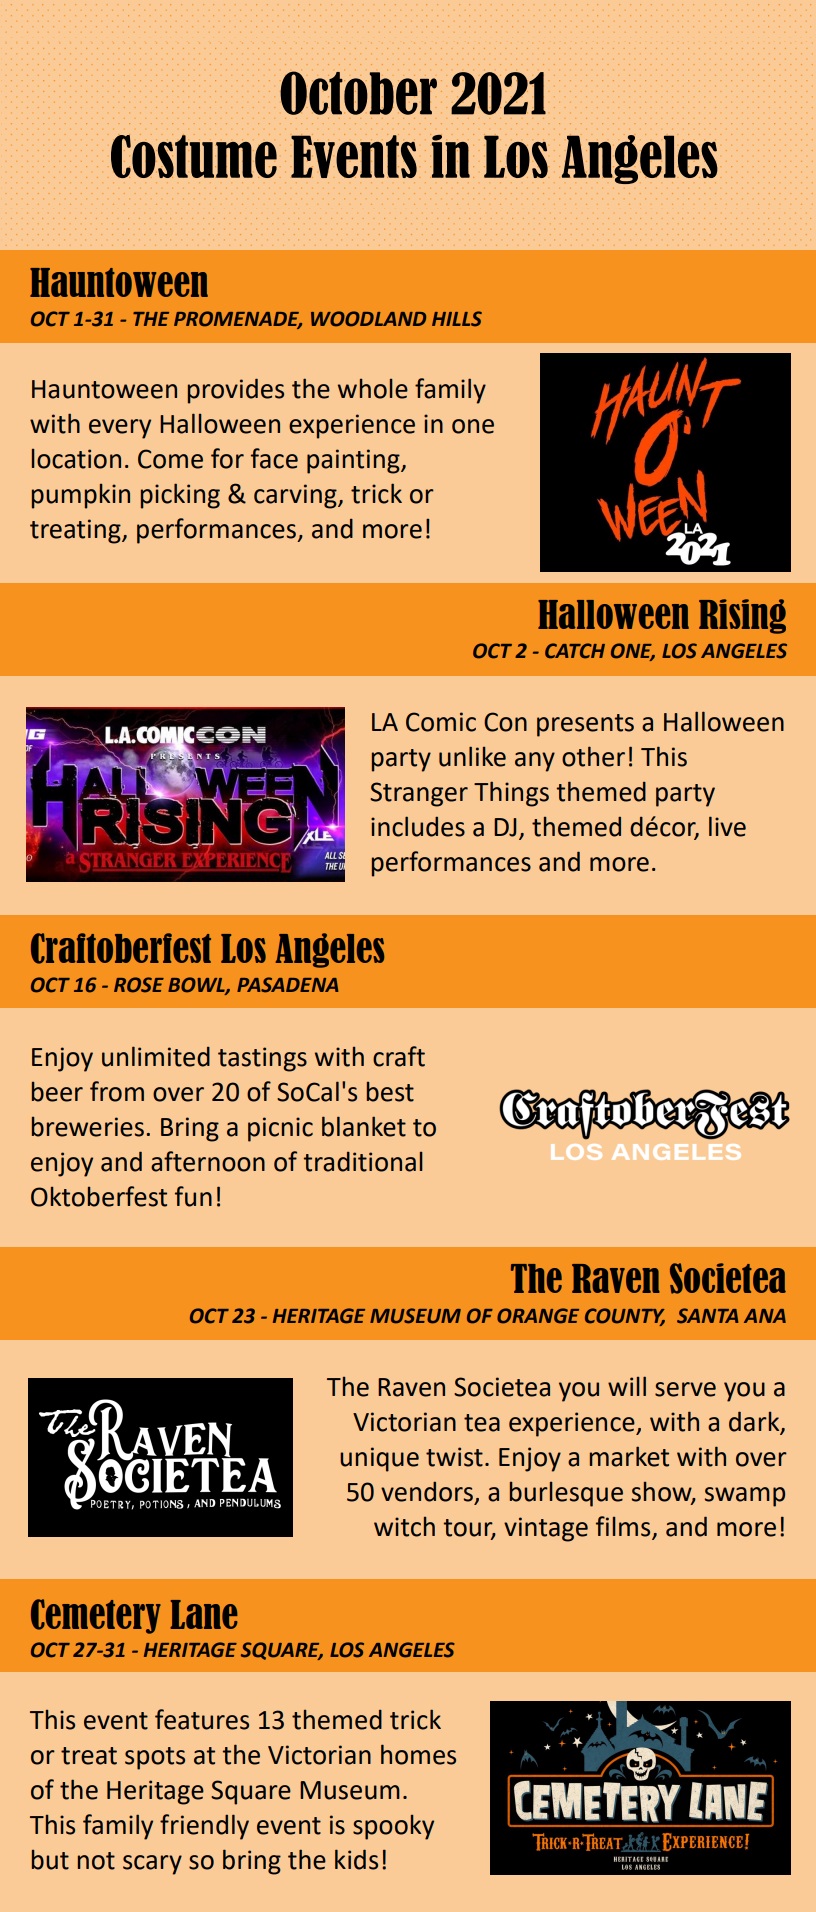 october los angeles costume events info-oct-2021-costume-events